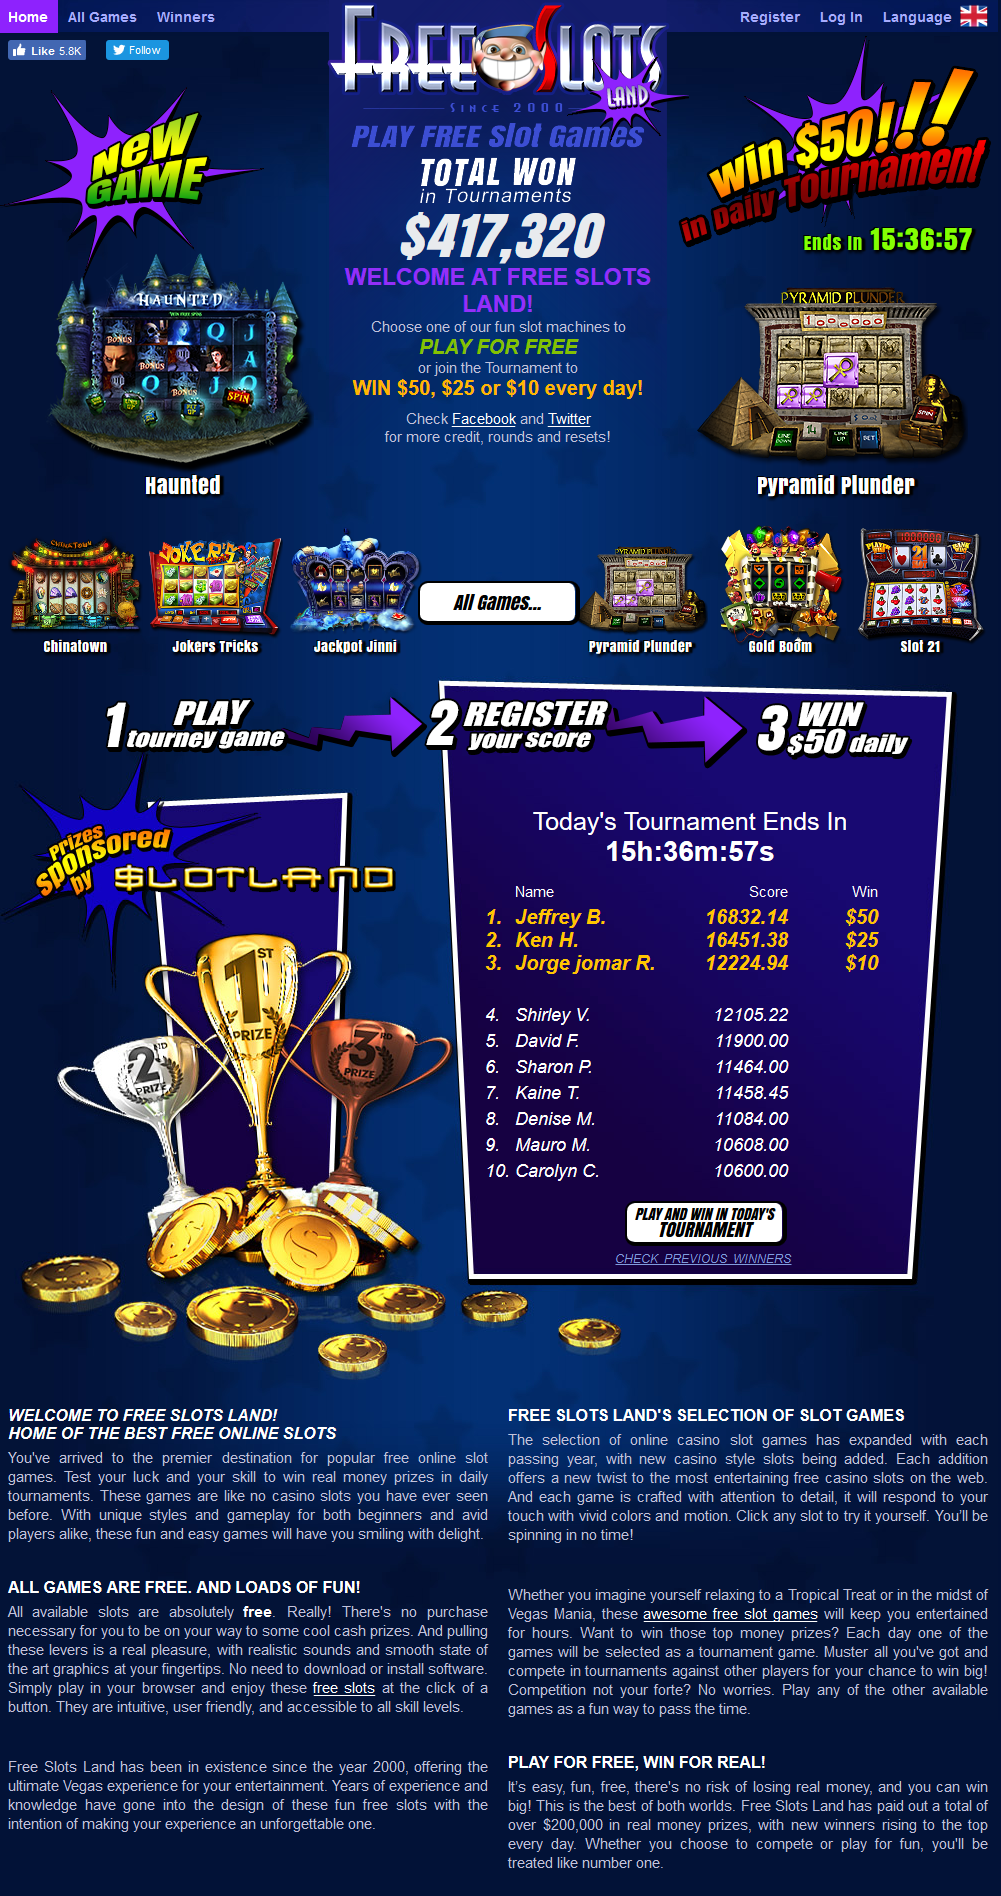 Free Slots Land - Play Free
                                        Online Slots and Win Real Money
                                        Play Free Slots Online! YOU can
                                        Win Real Money Prizes of $50